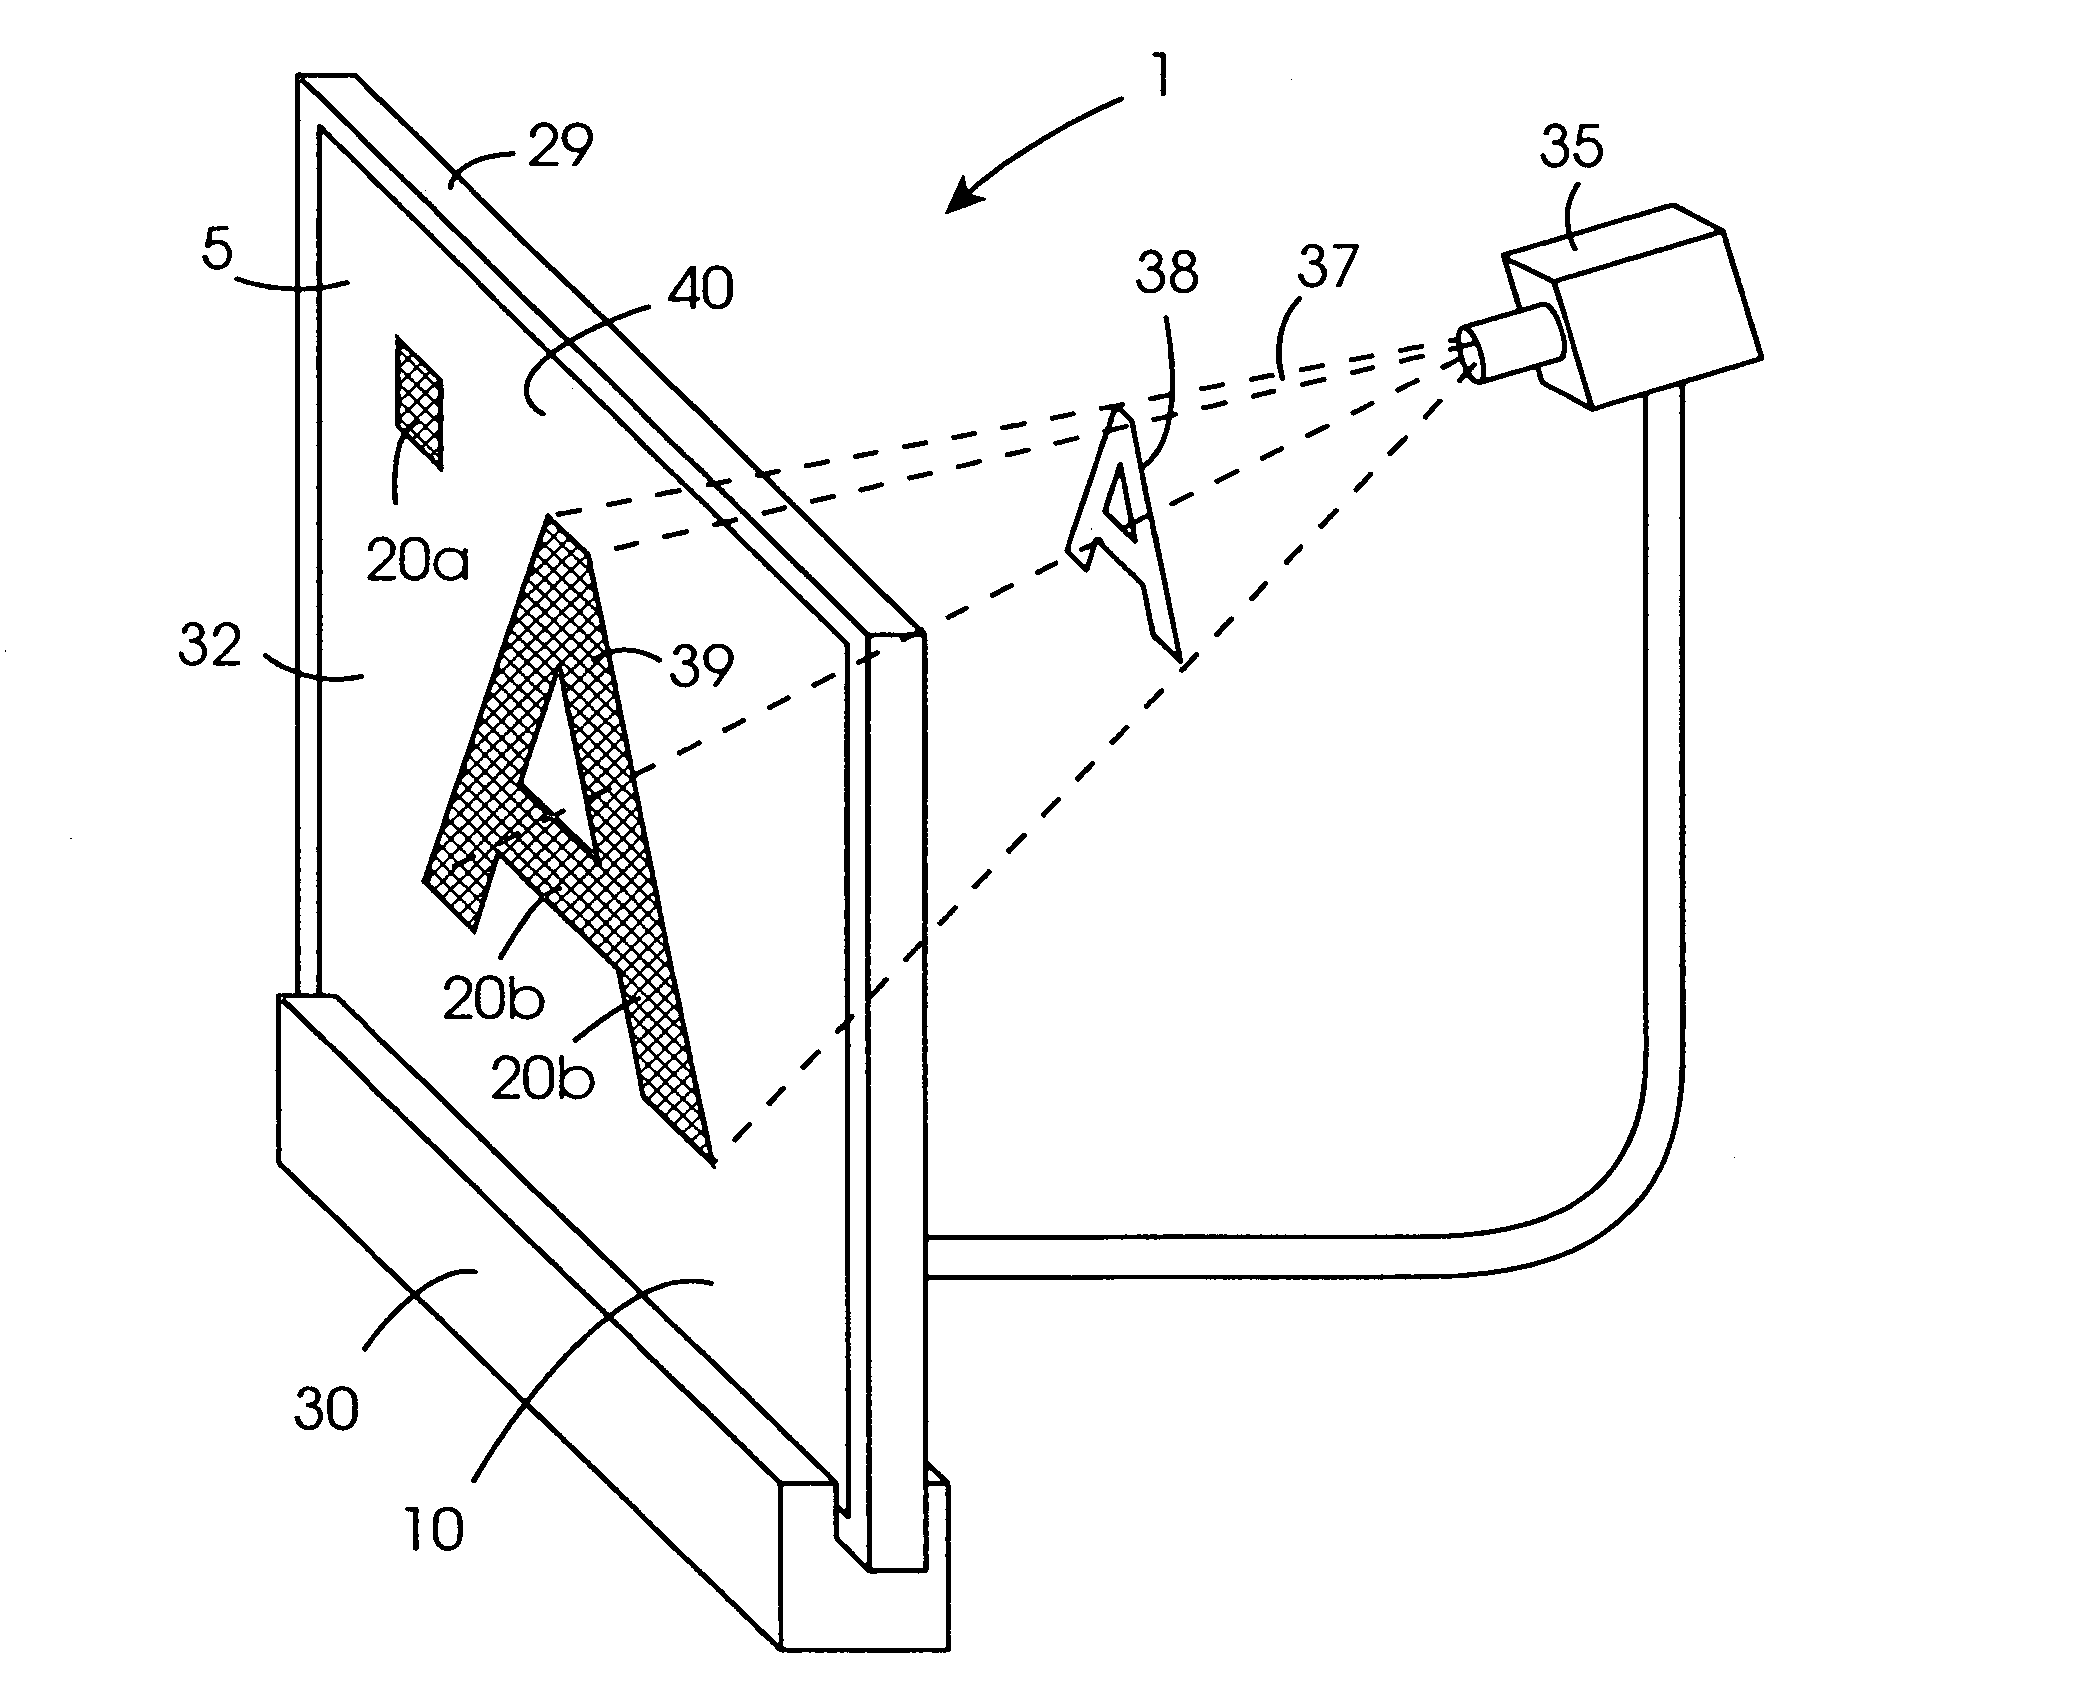 Visual display device and a method for operating a visual display panel